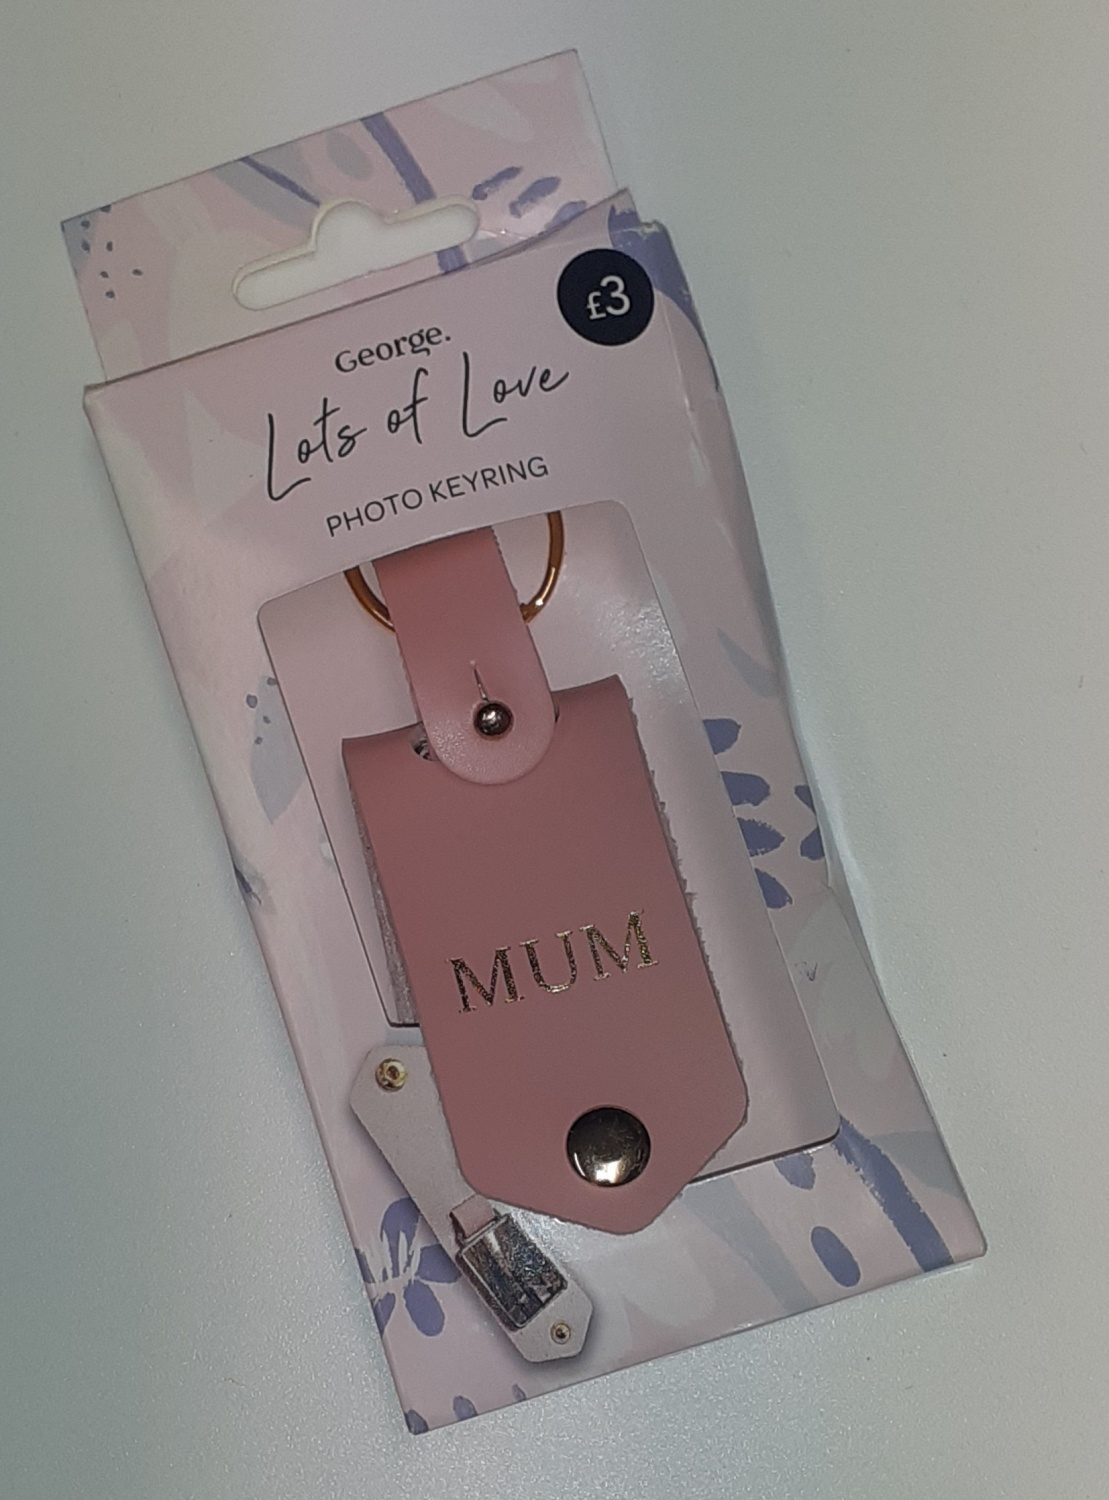 George Lots of Love Mum Pink Photo Keyring RRP 3 CLEARANCE XL 1.50